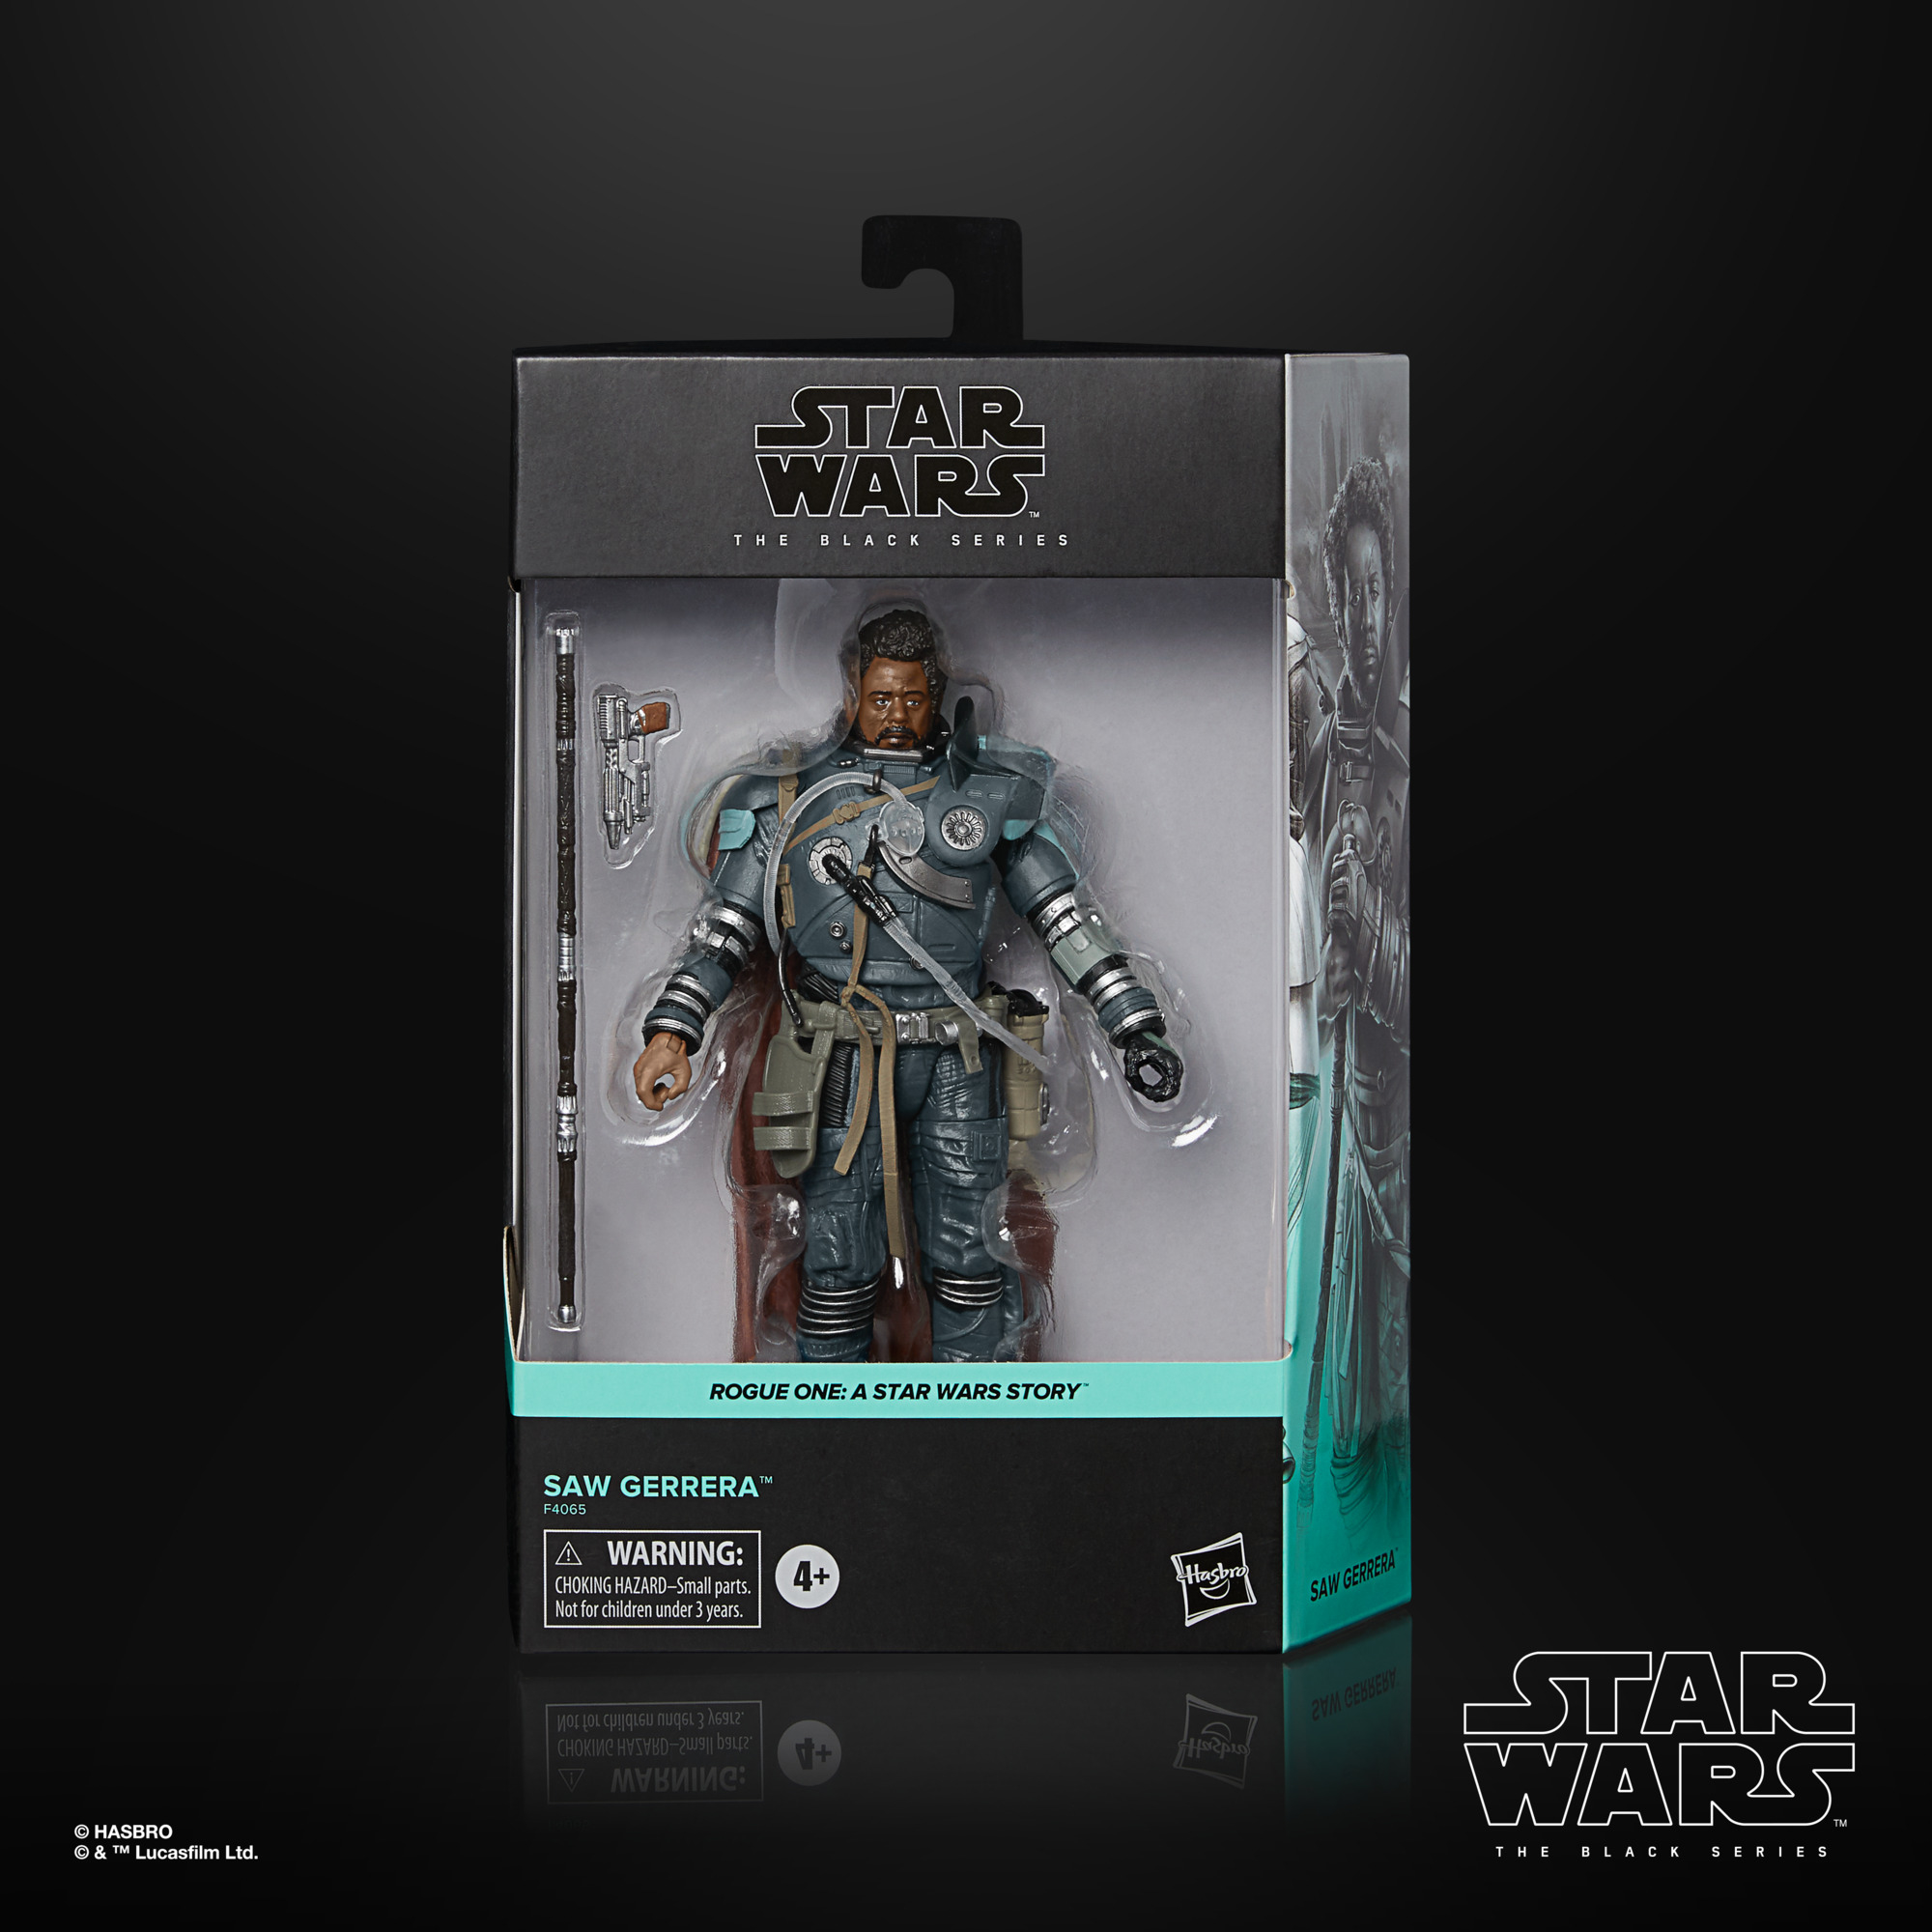 Star Wars - The Black Series - Rogue One - Saw Gerrera Deluxe Action Figure